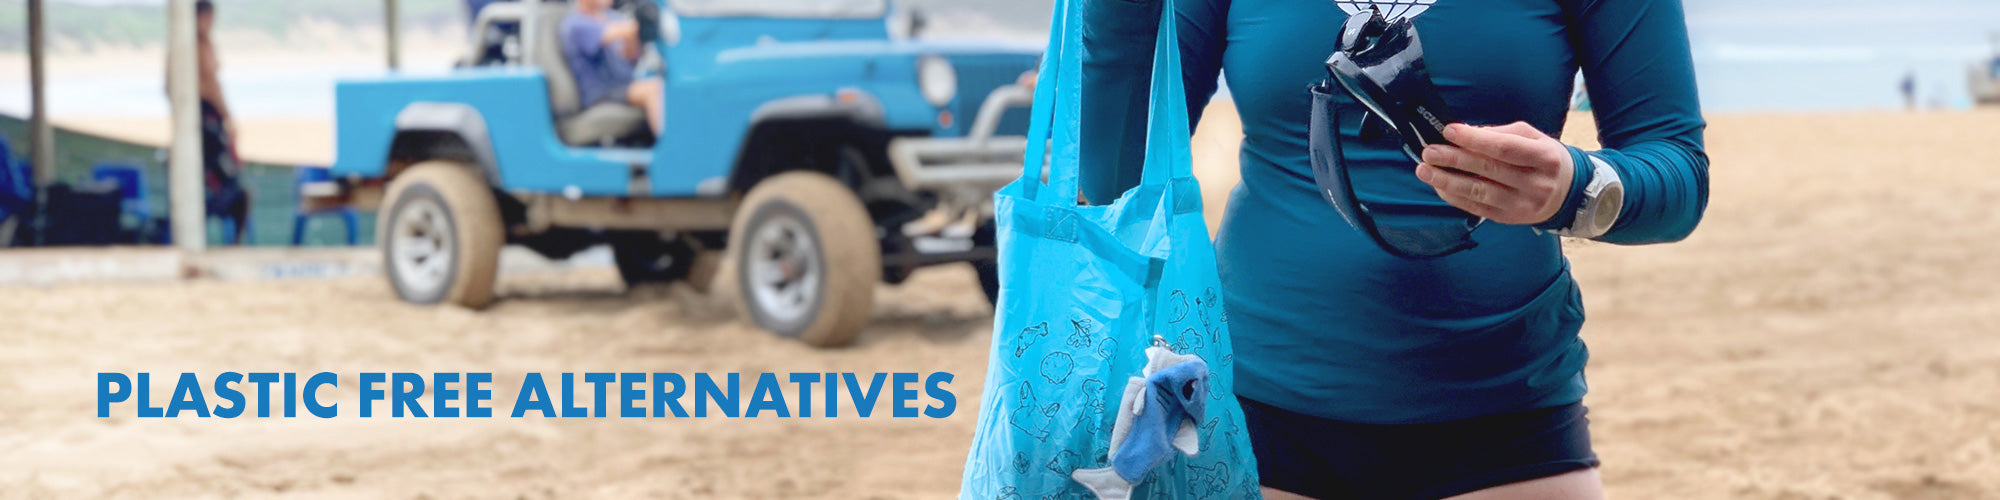 Plastic free alternatives collection page.